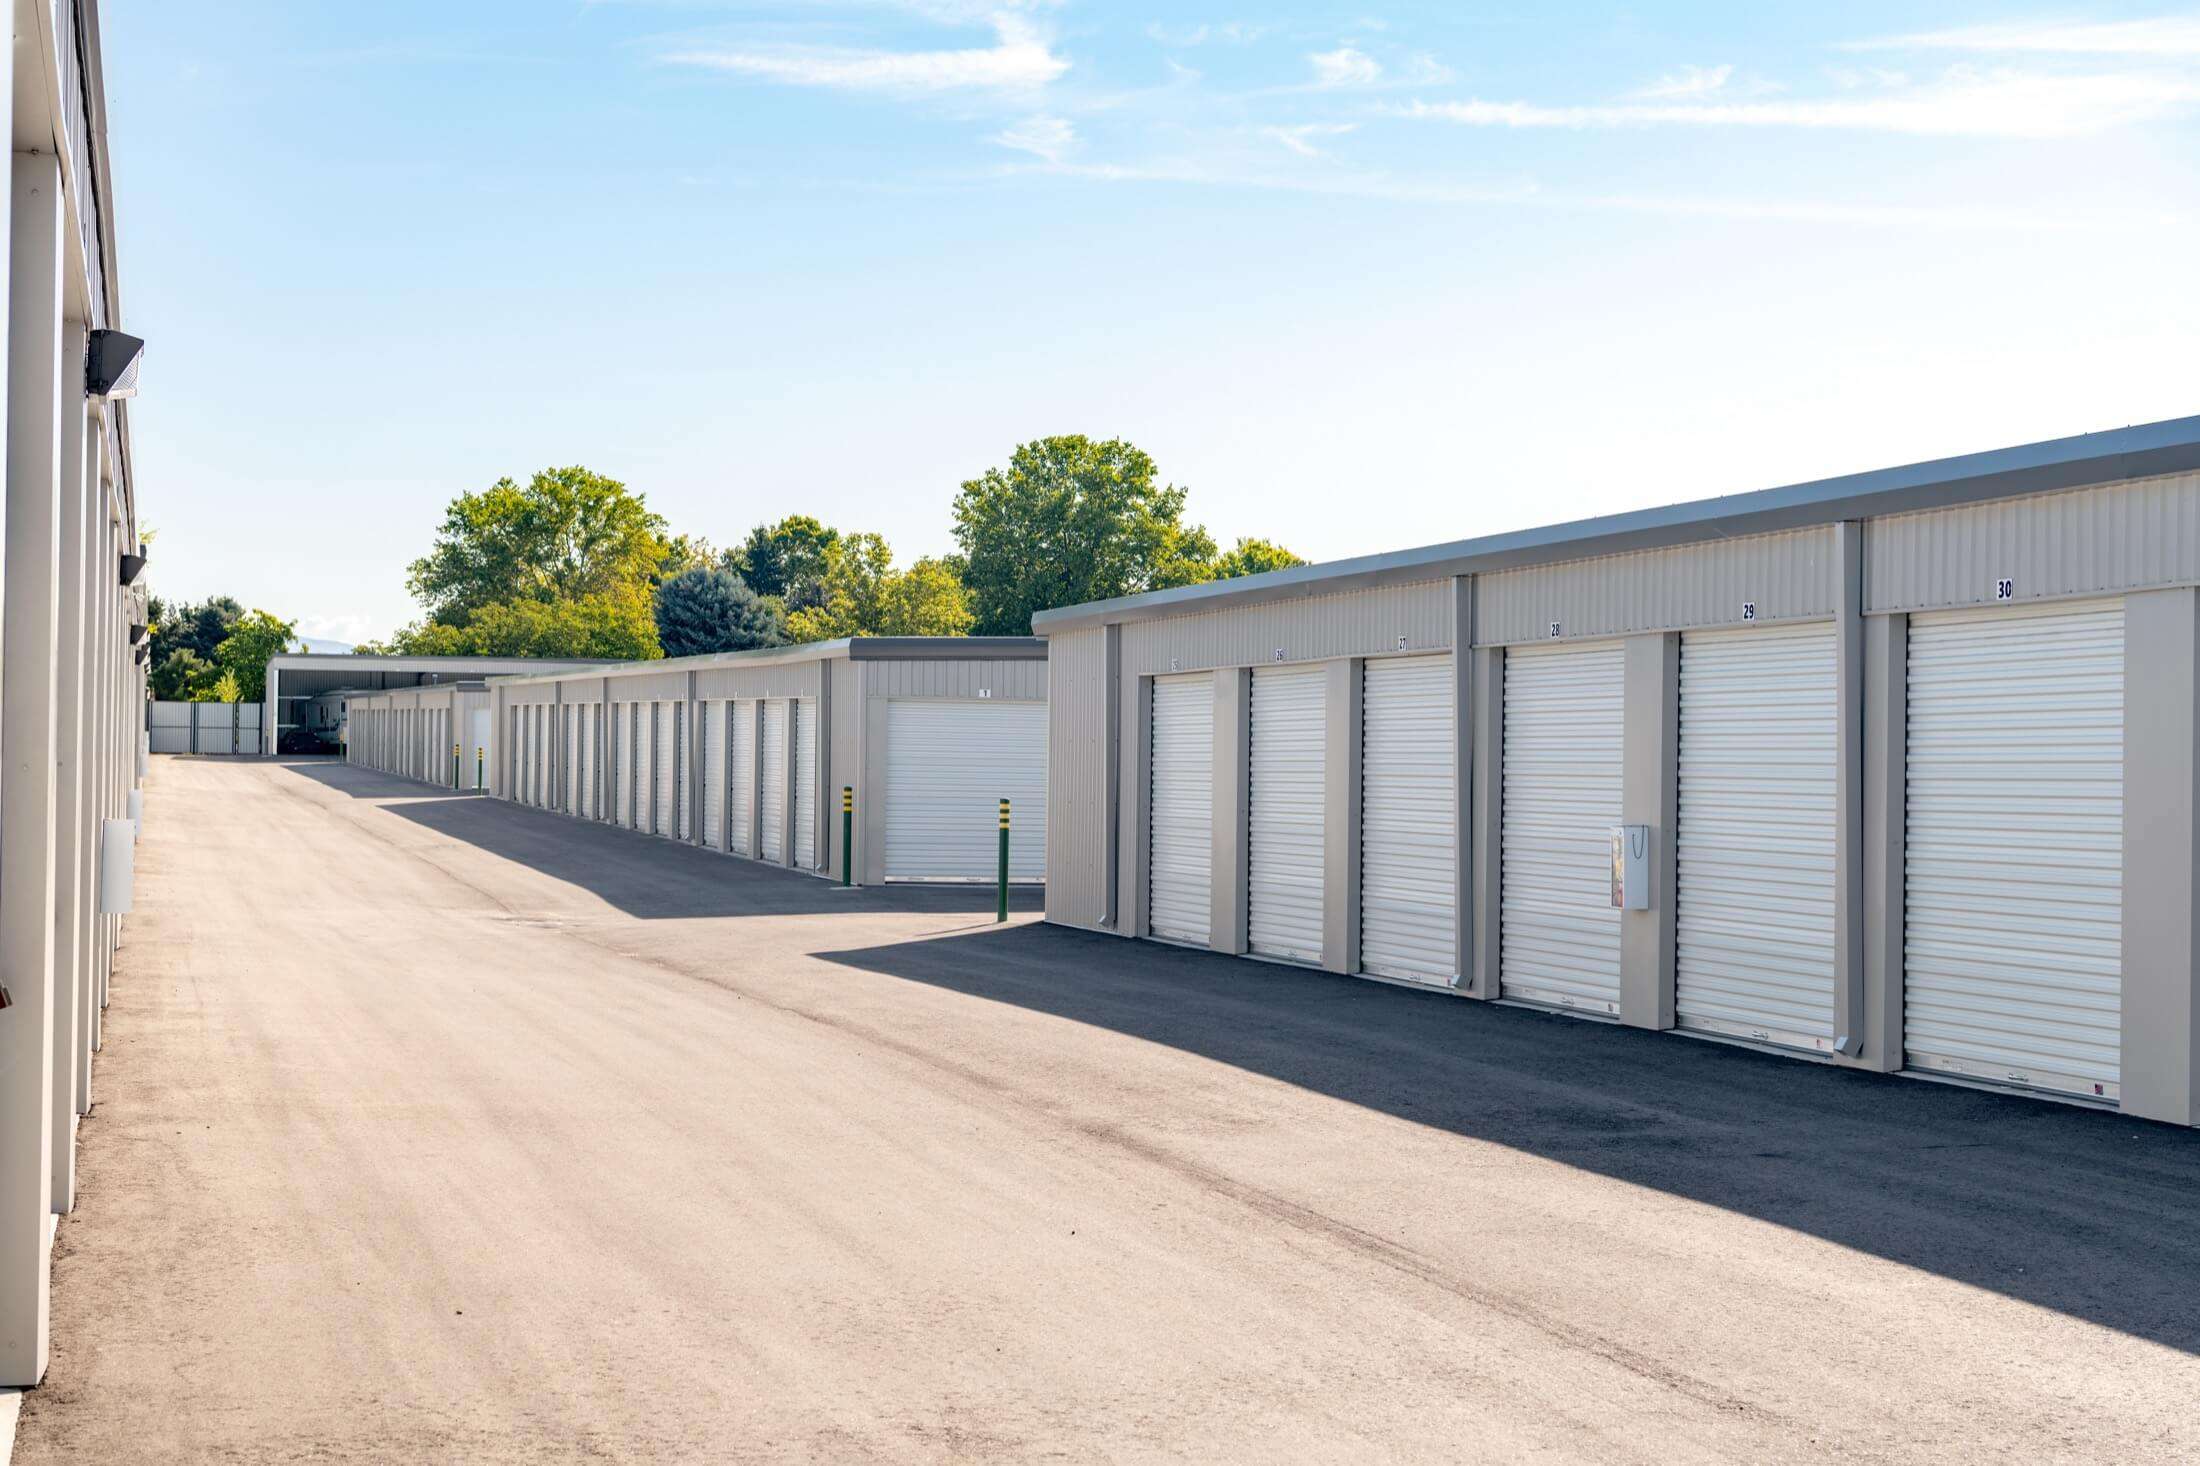 Multiple buildings with self storage units